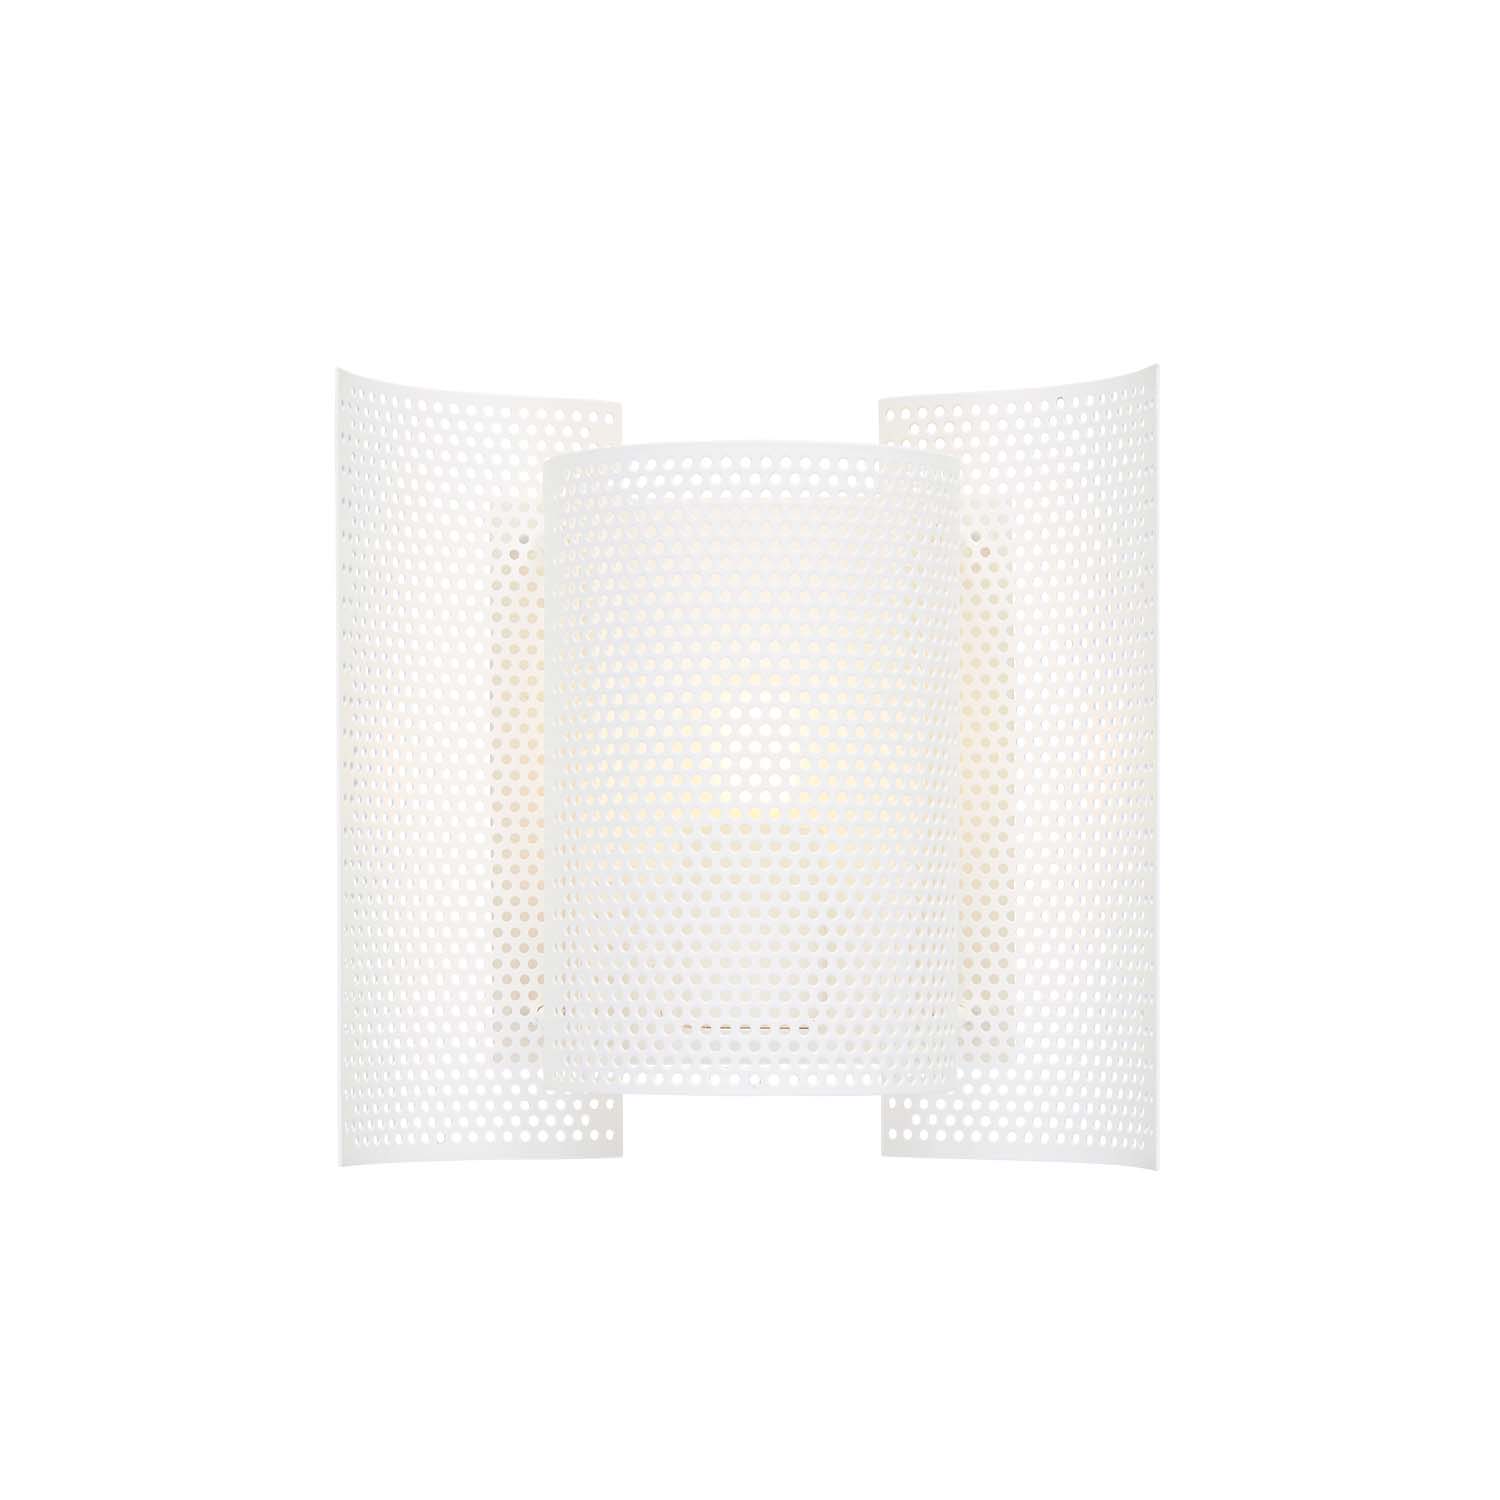 BUTTERFLY Perforated - Vintage perforated steel wall light